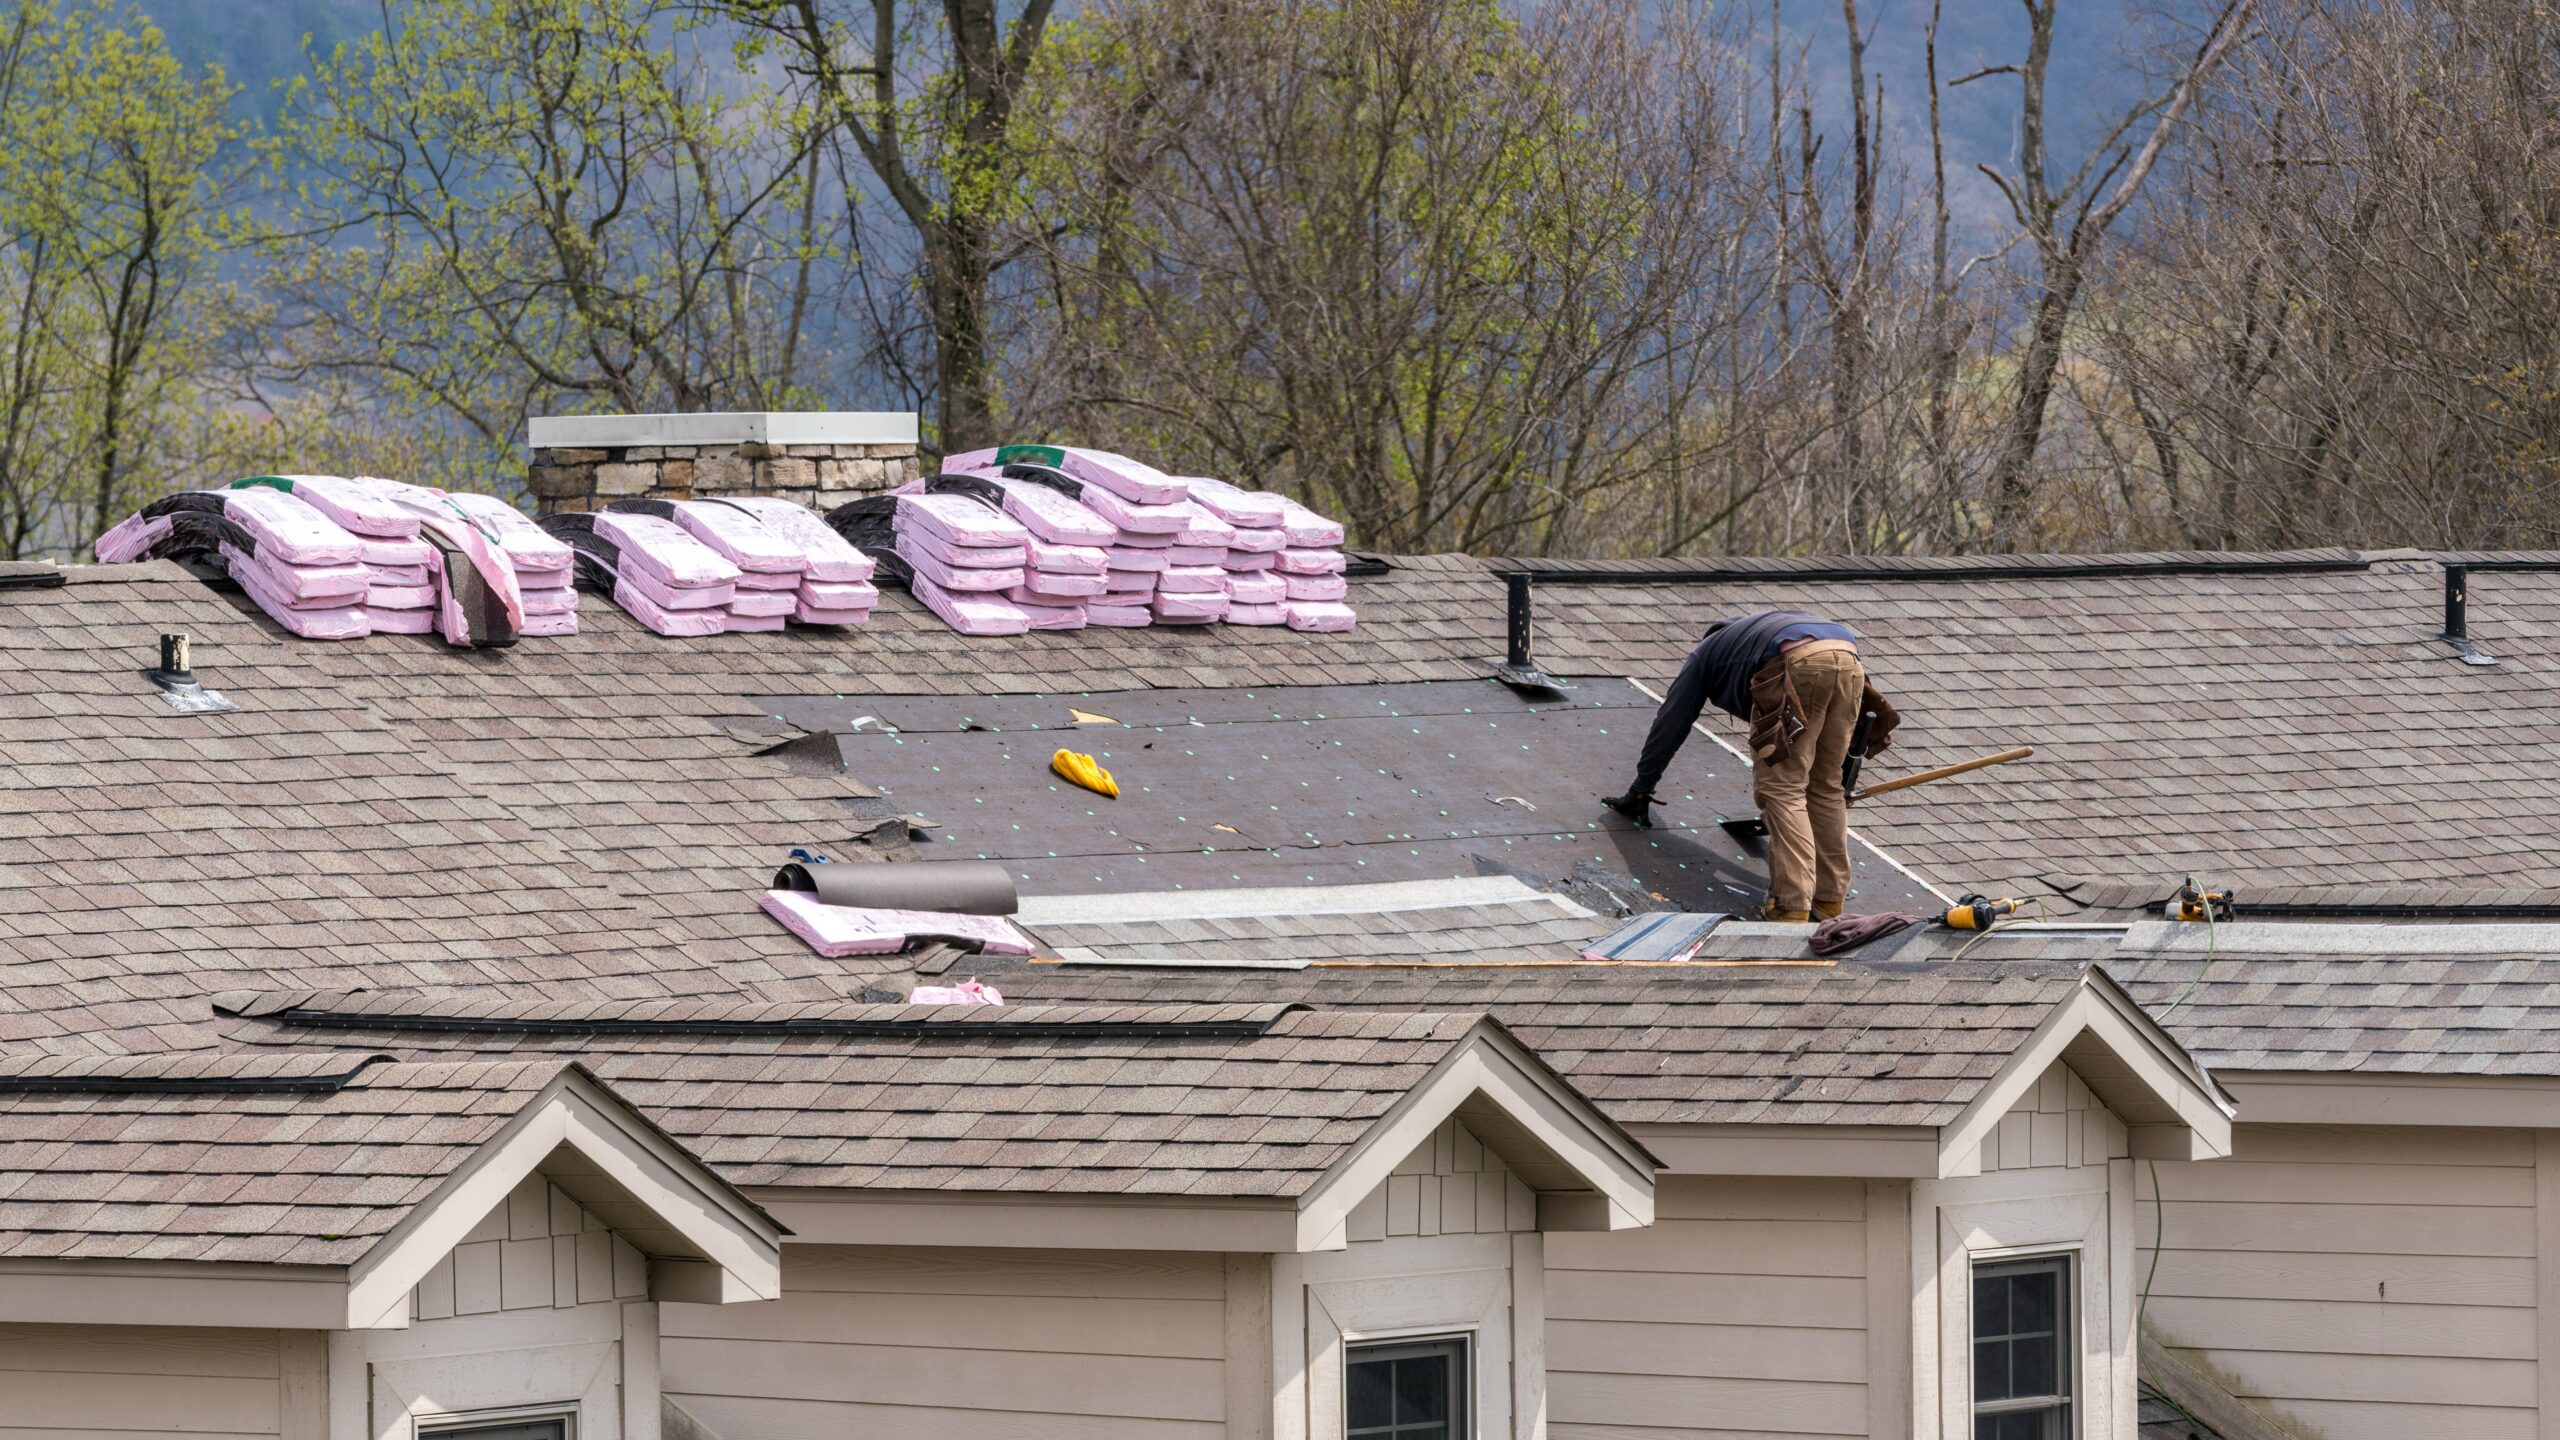 roofing laborer installing shingle roof.